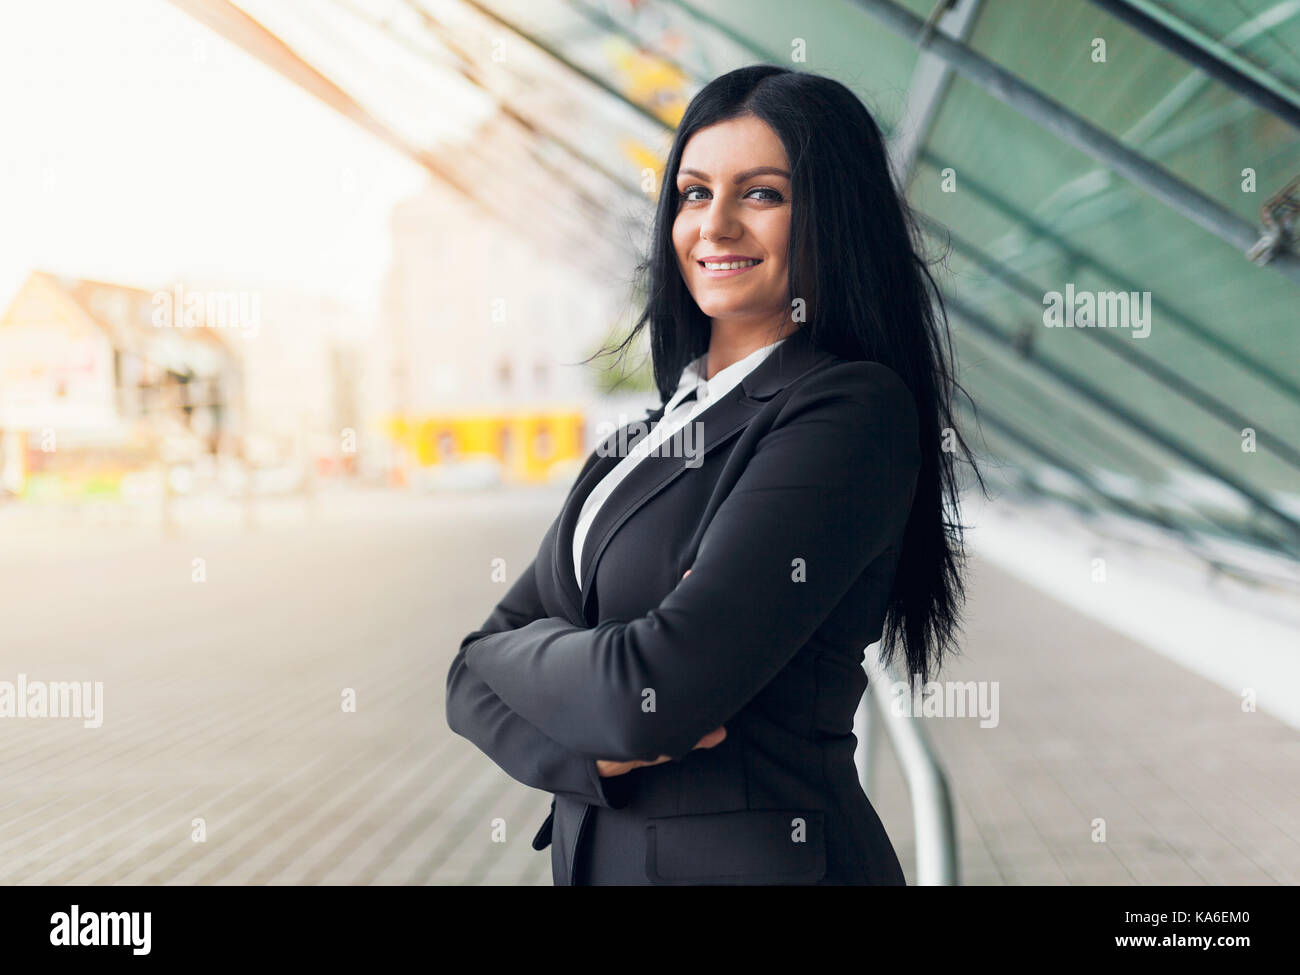 Beautiful young and confidents business woman in urban setting Stock Photo